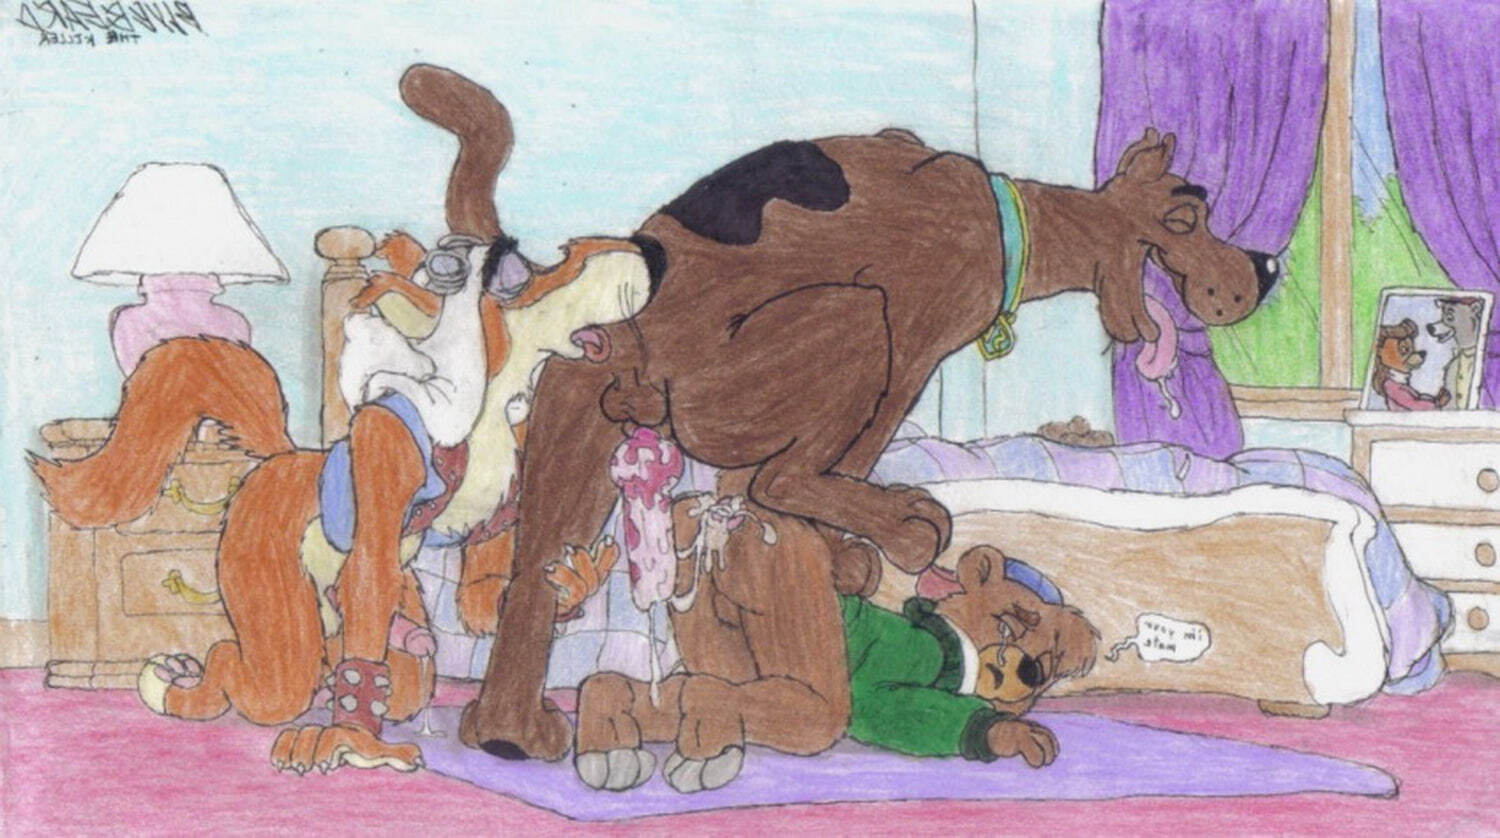 Scooby Doo pics tagged as scat, gay, threesome, penis, cum, furry. 